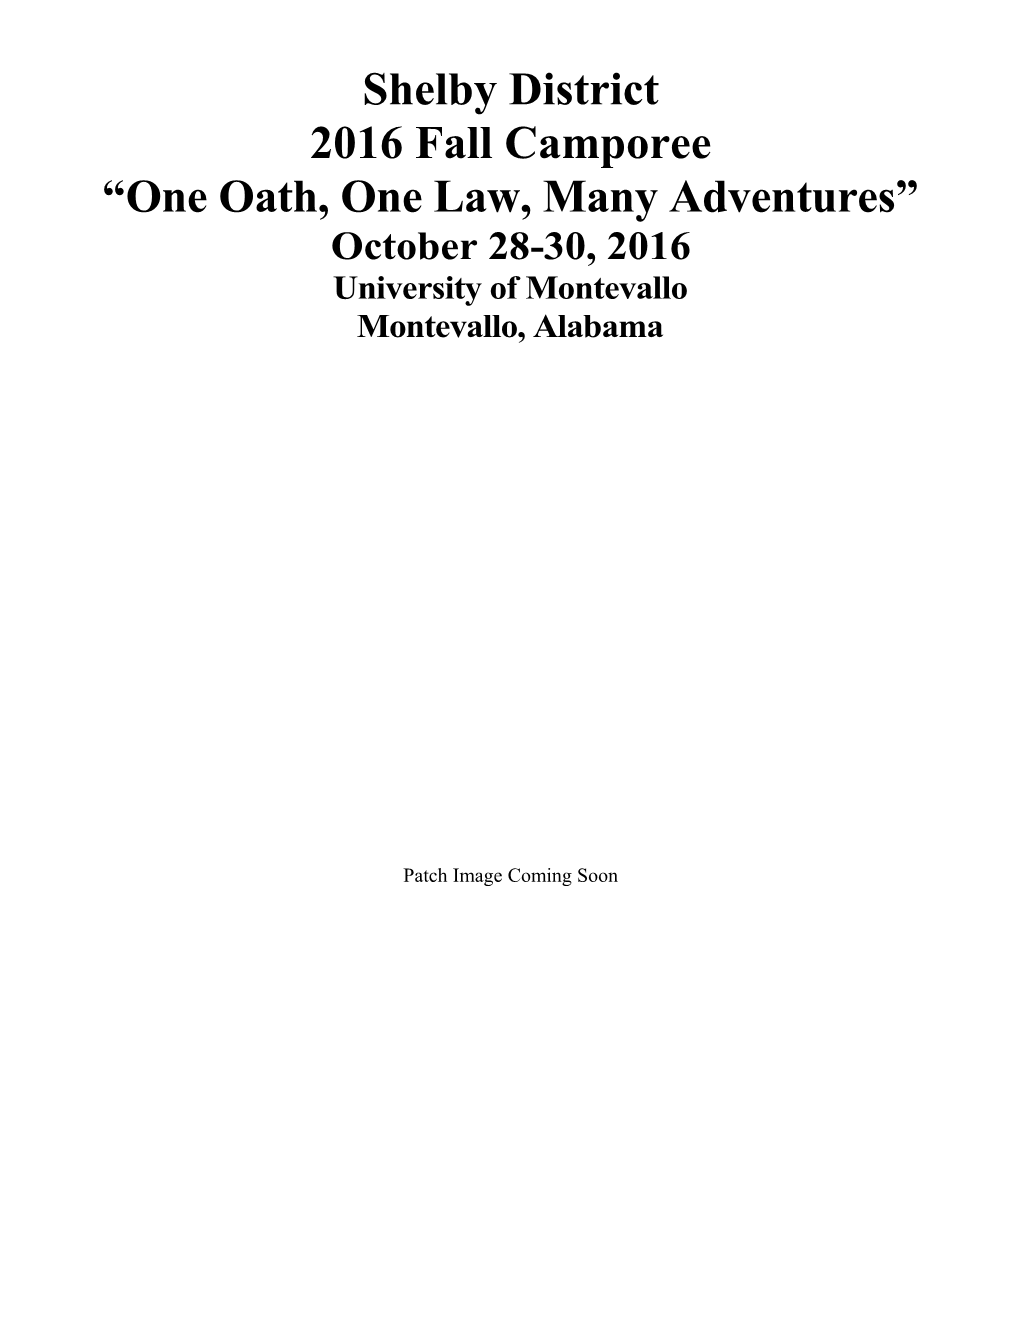 One Oath, One Law, Many Adventures